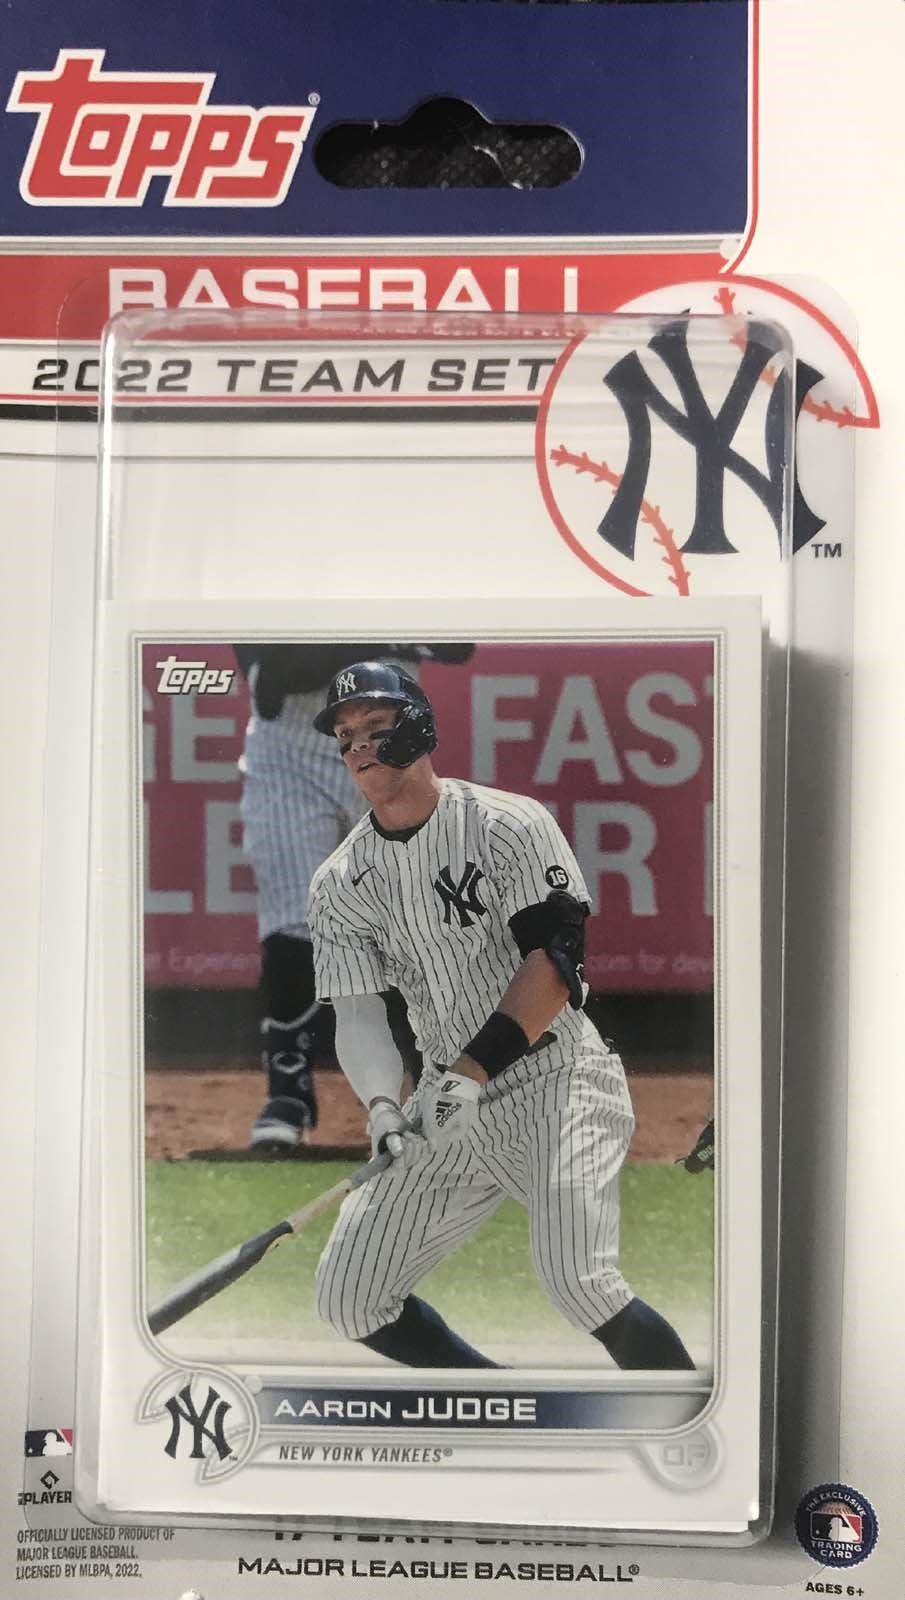  2022 Topps Update Gold #US56 Jonathan Loaisiga /2022 New York  Yankees Baseball Trading Card : Collectibles & Fine Art